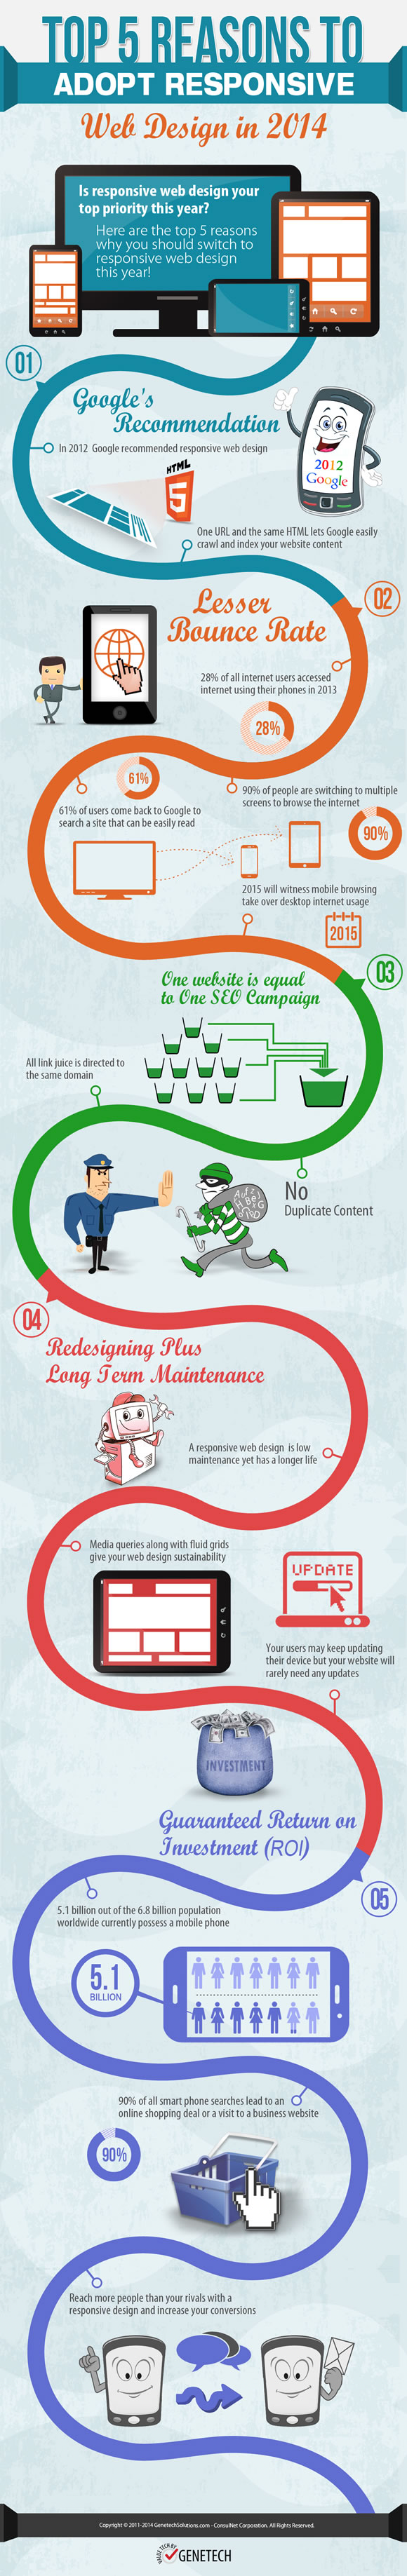 Infographic - Top 5 Reasons For Using Responsive Web Design